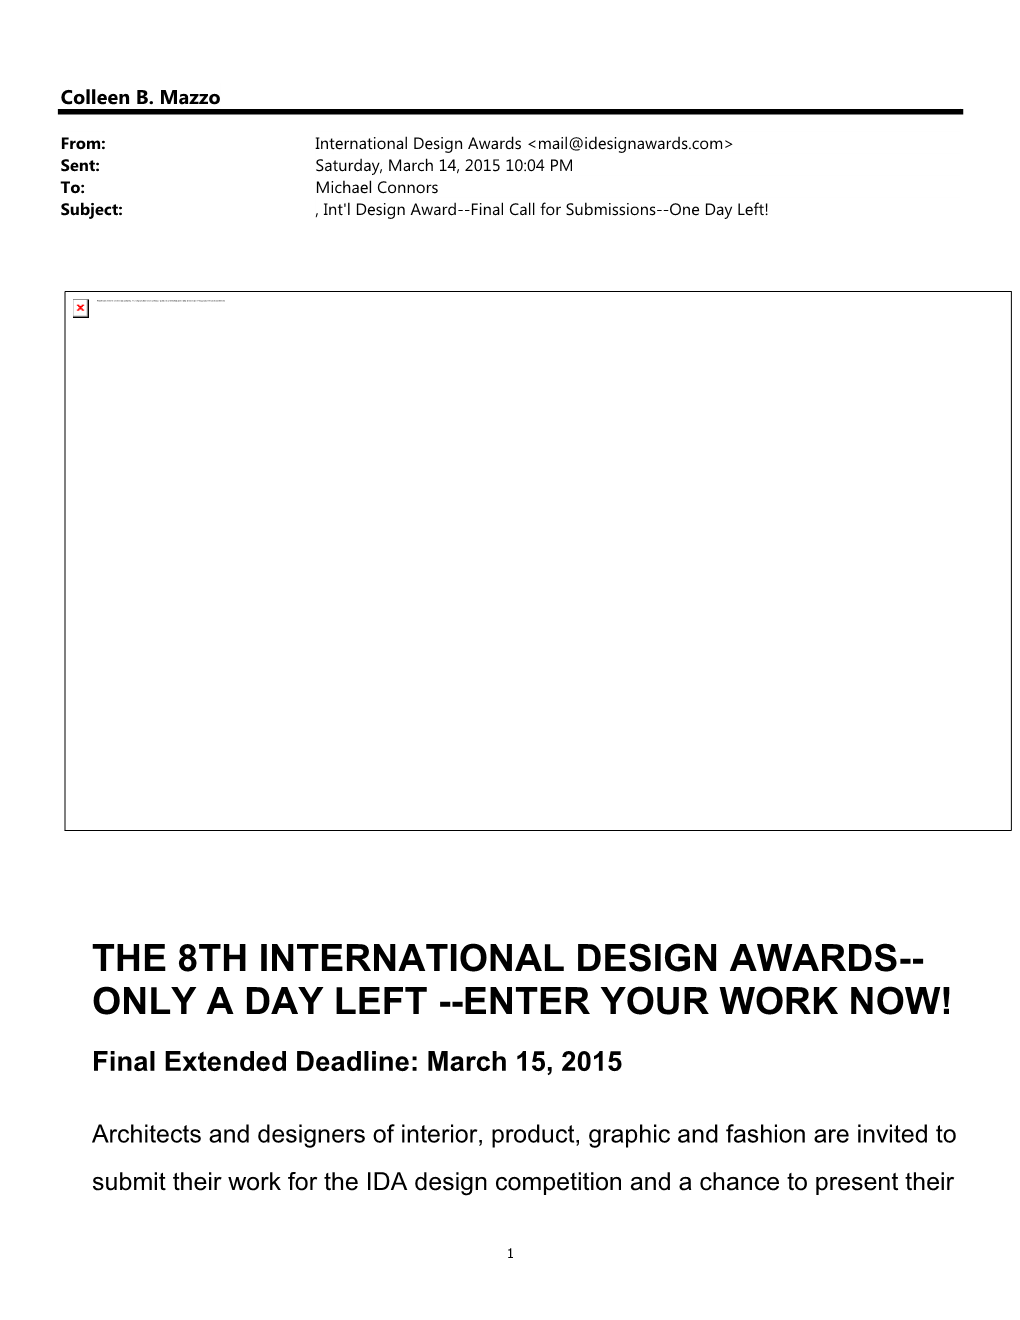 THE 8TH INTERNATIONAL DESIGN AWARDS-- ONLY a DAY LEFT --ENTER YOUR WORK NOW! Final Extended Deadline: March 15, 2015